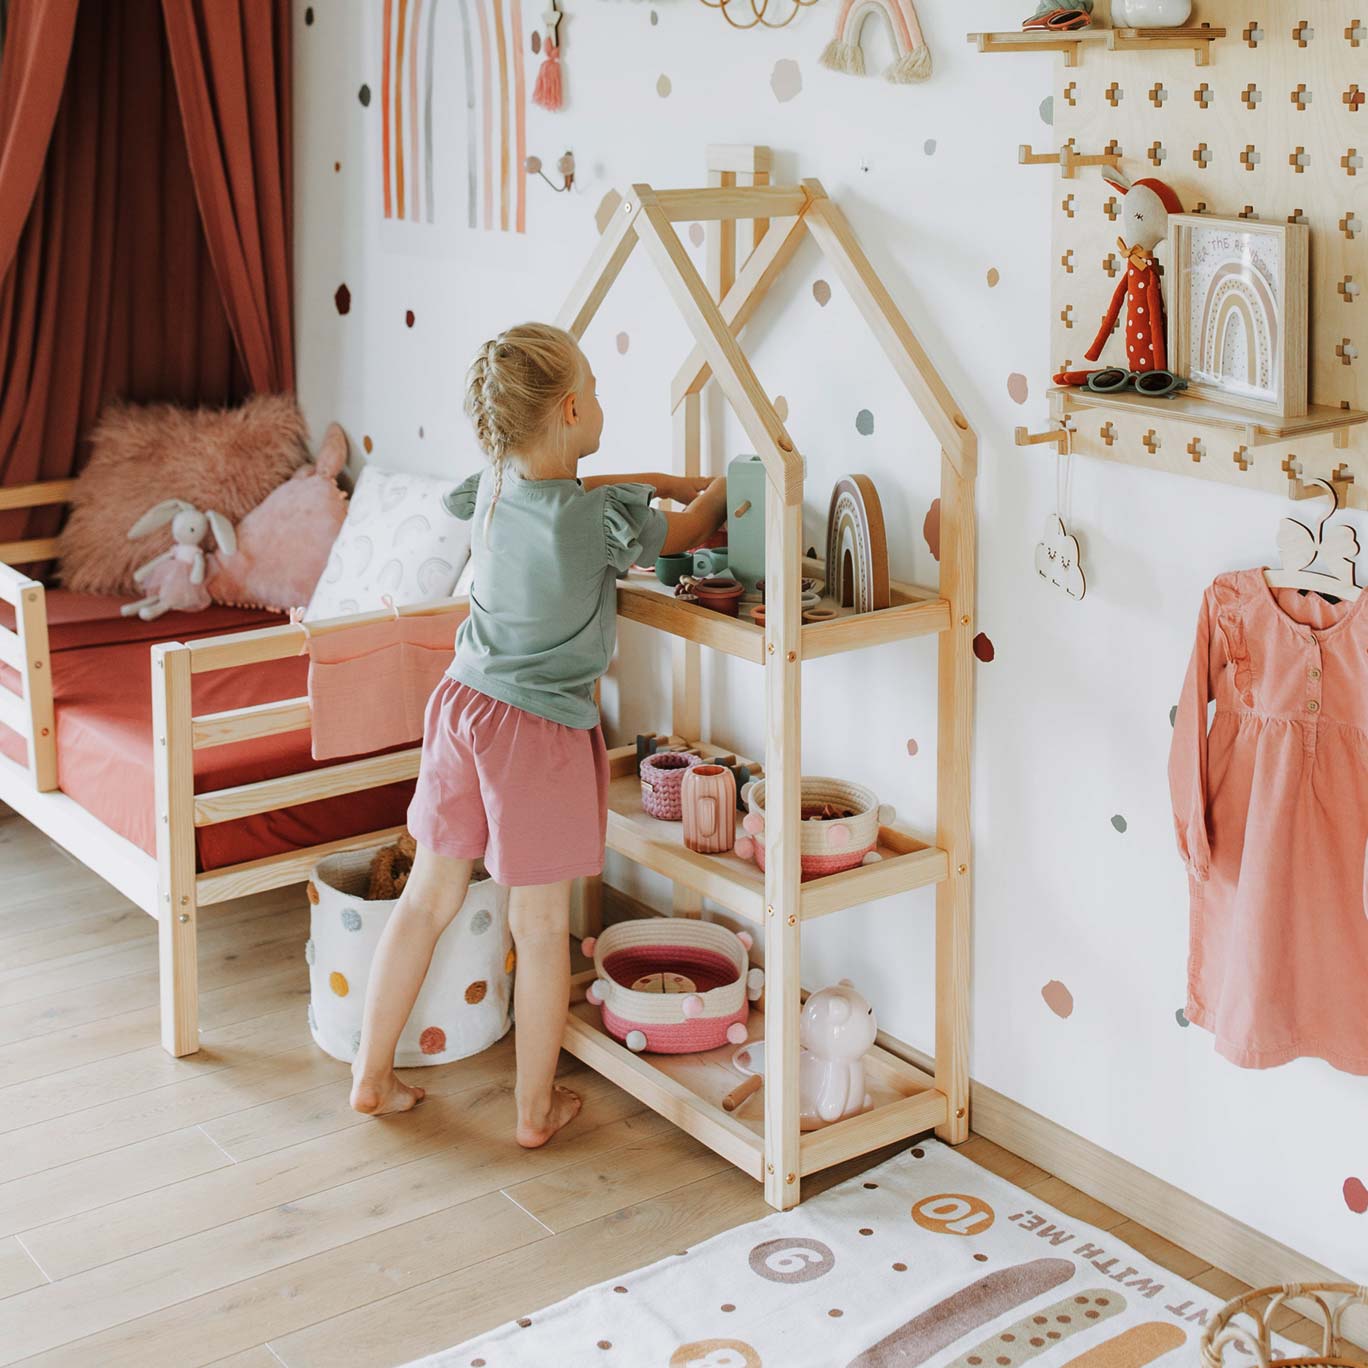 Types of toy shelves. A girl stanfing next to house shaped toddler toy shelf and playing.